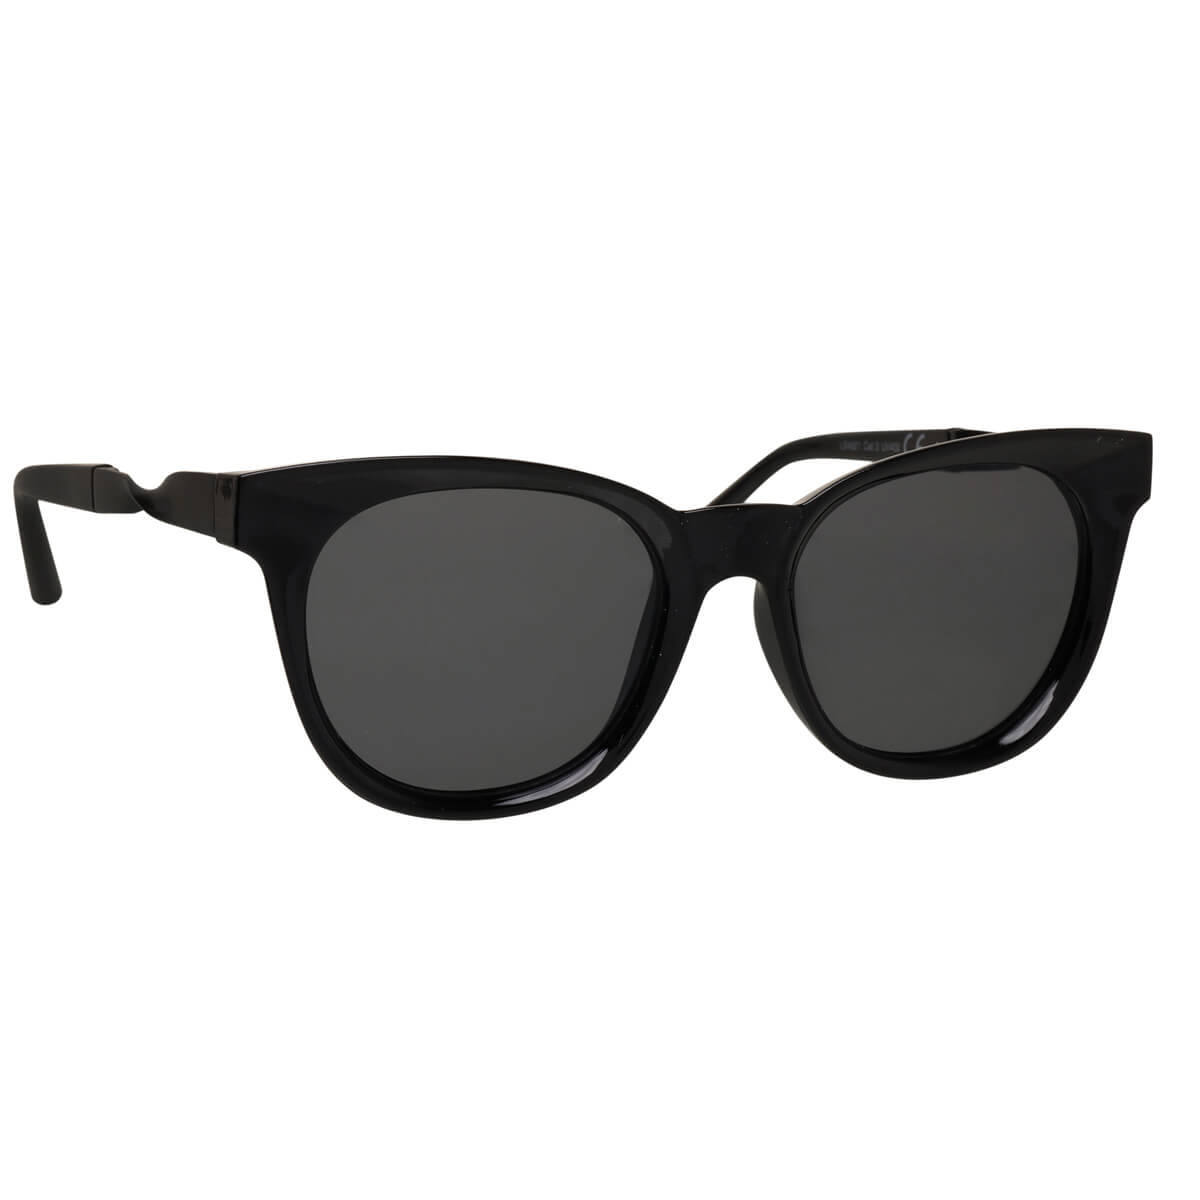 Women's round sunglasses with decoration